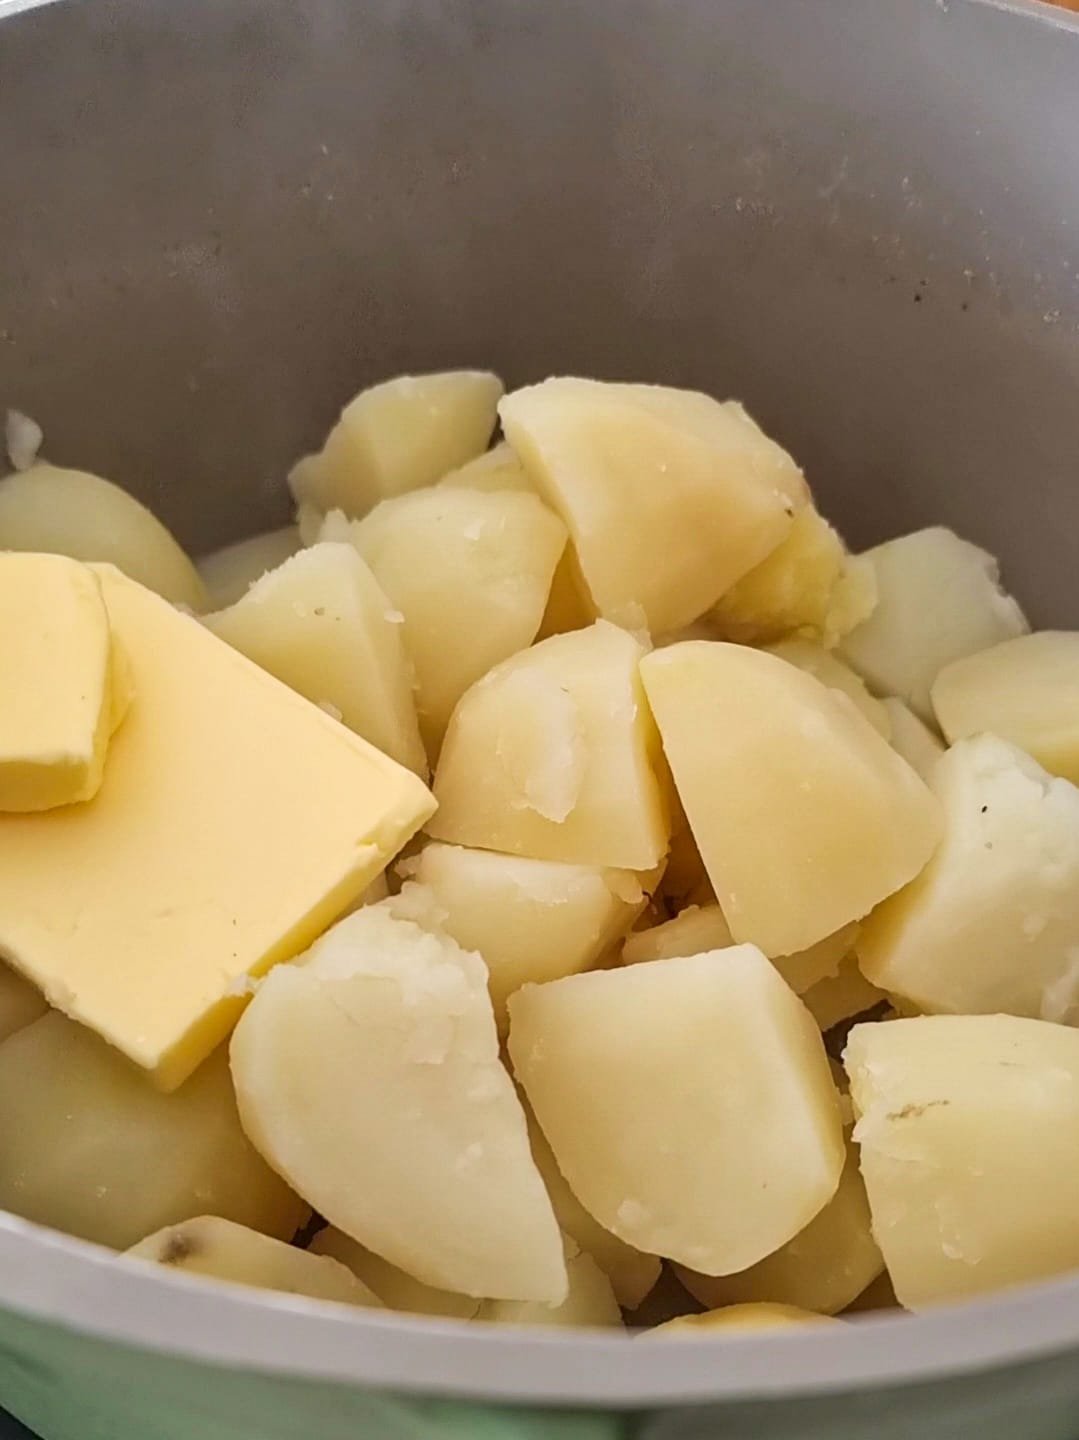 Boil your potatoes enough that your fork goes all the way through, then mash with butter and milk.